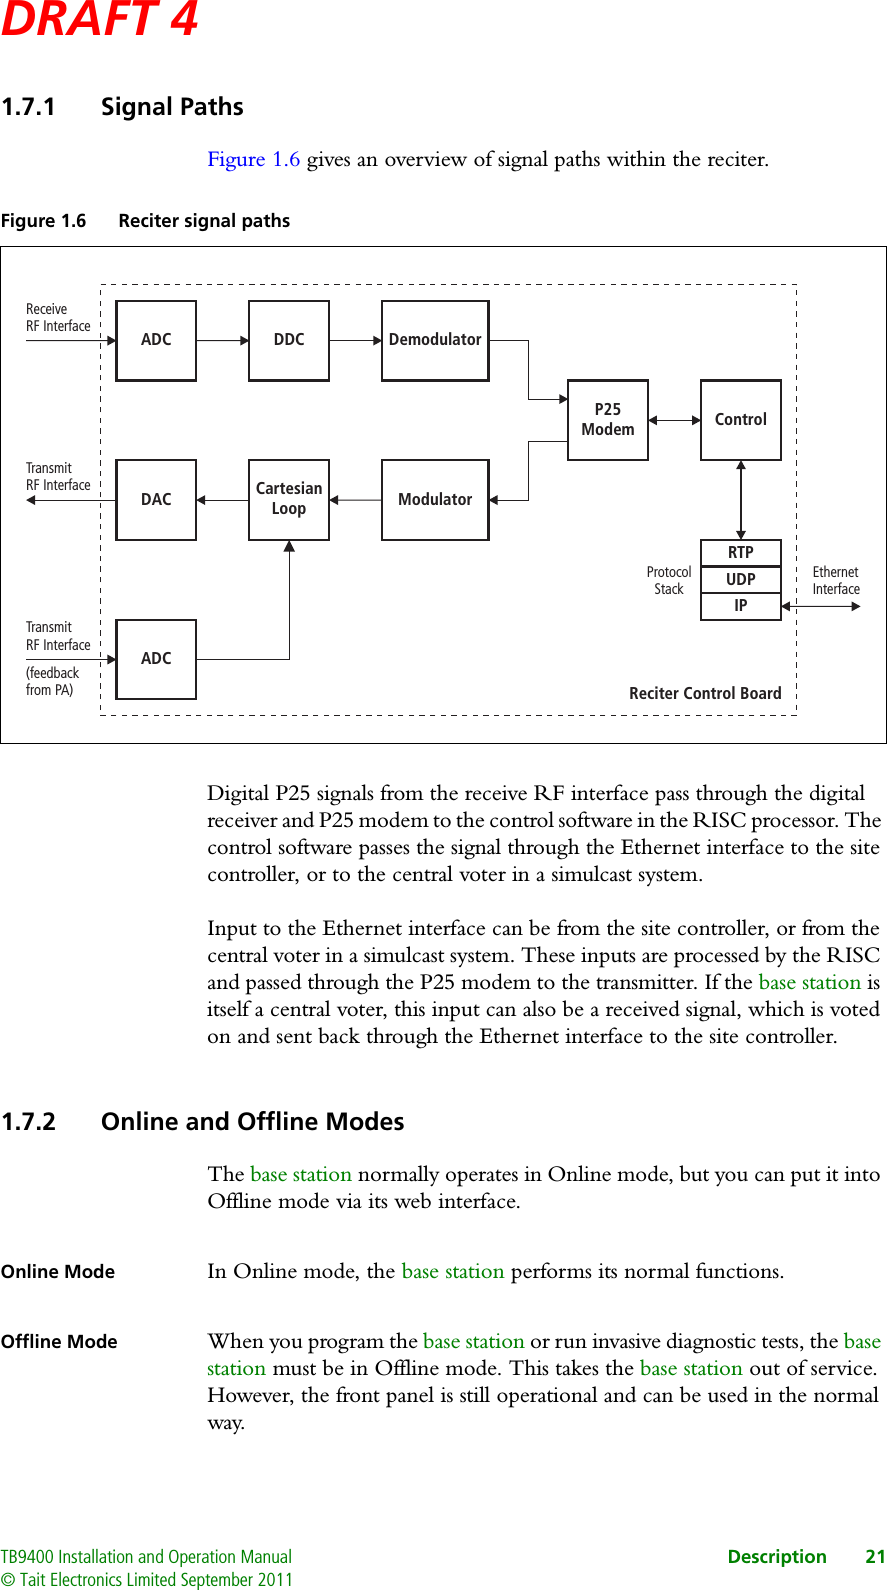 DRAFT 4 TB9400 Installation and Operation Manual Description 21© Tait Electronics Limited September 20111.7.1 Signal PathsFigure 1.6 gives an overview of signal paths within the reciter. Digital P25 signals from the receive RF interface pass through the digital receiver and P25 modem to the control software in the RISC processor. The control software passes the signal through the Ethernet interface to the site controller, or to the central voter in a simulcast system.Input to the Ethernet interface can be from the site controller, or from the central voter in a simulcast system. These inputs are processed by the RISC and passed through the P25 modem to the transmitter. If the base station is itself a central voter, this input can also be a received signal, which is voted on and sent back through the Ethernet interface to the site controller.1.7.2 Online and Offline ModesThe base station normally operates in Online mode, but you can put it into Offline mode via its web interface.Online Mode In Online mode, the base station performs its normal functions. Offline Mode When you program the base station or run invasive diagnostic tests, the base station must be in Offline mode. This takes the base station out of service. However, the front panel is still operational and can be used in the normal way. Figure 1.6 Reciter signal pathsModulatorDemodulatorP25ModemCartesianLoopControlADCADCDDCDACRTPUDPIPTransmitRF InterfaceTransmitRF Interface(feedbackfrom PA)ReceiveRF InterfaceEthernetInterfaceProtocolStackReciter Control Board